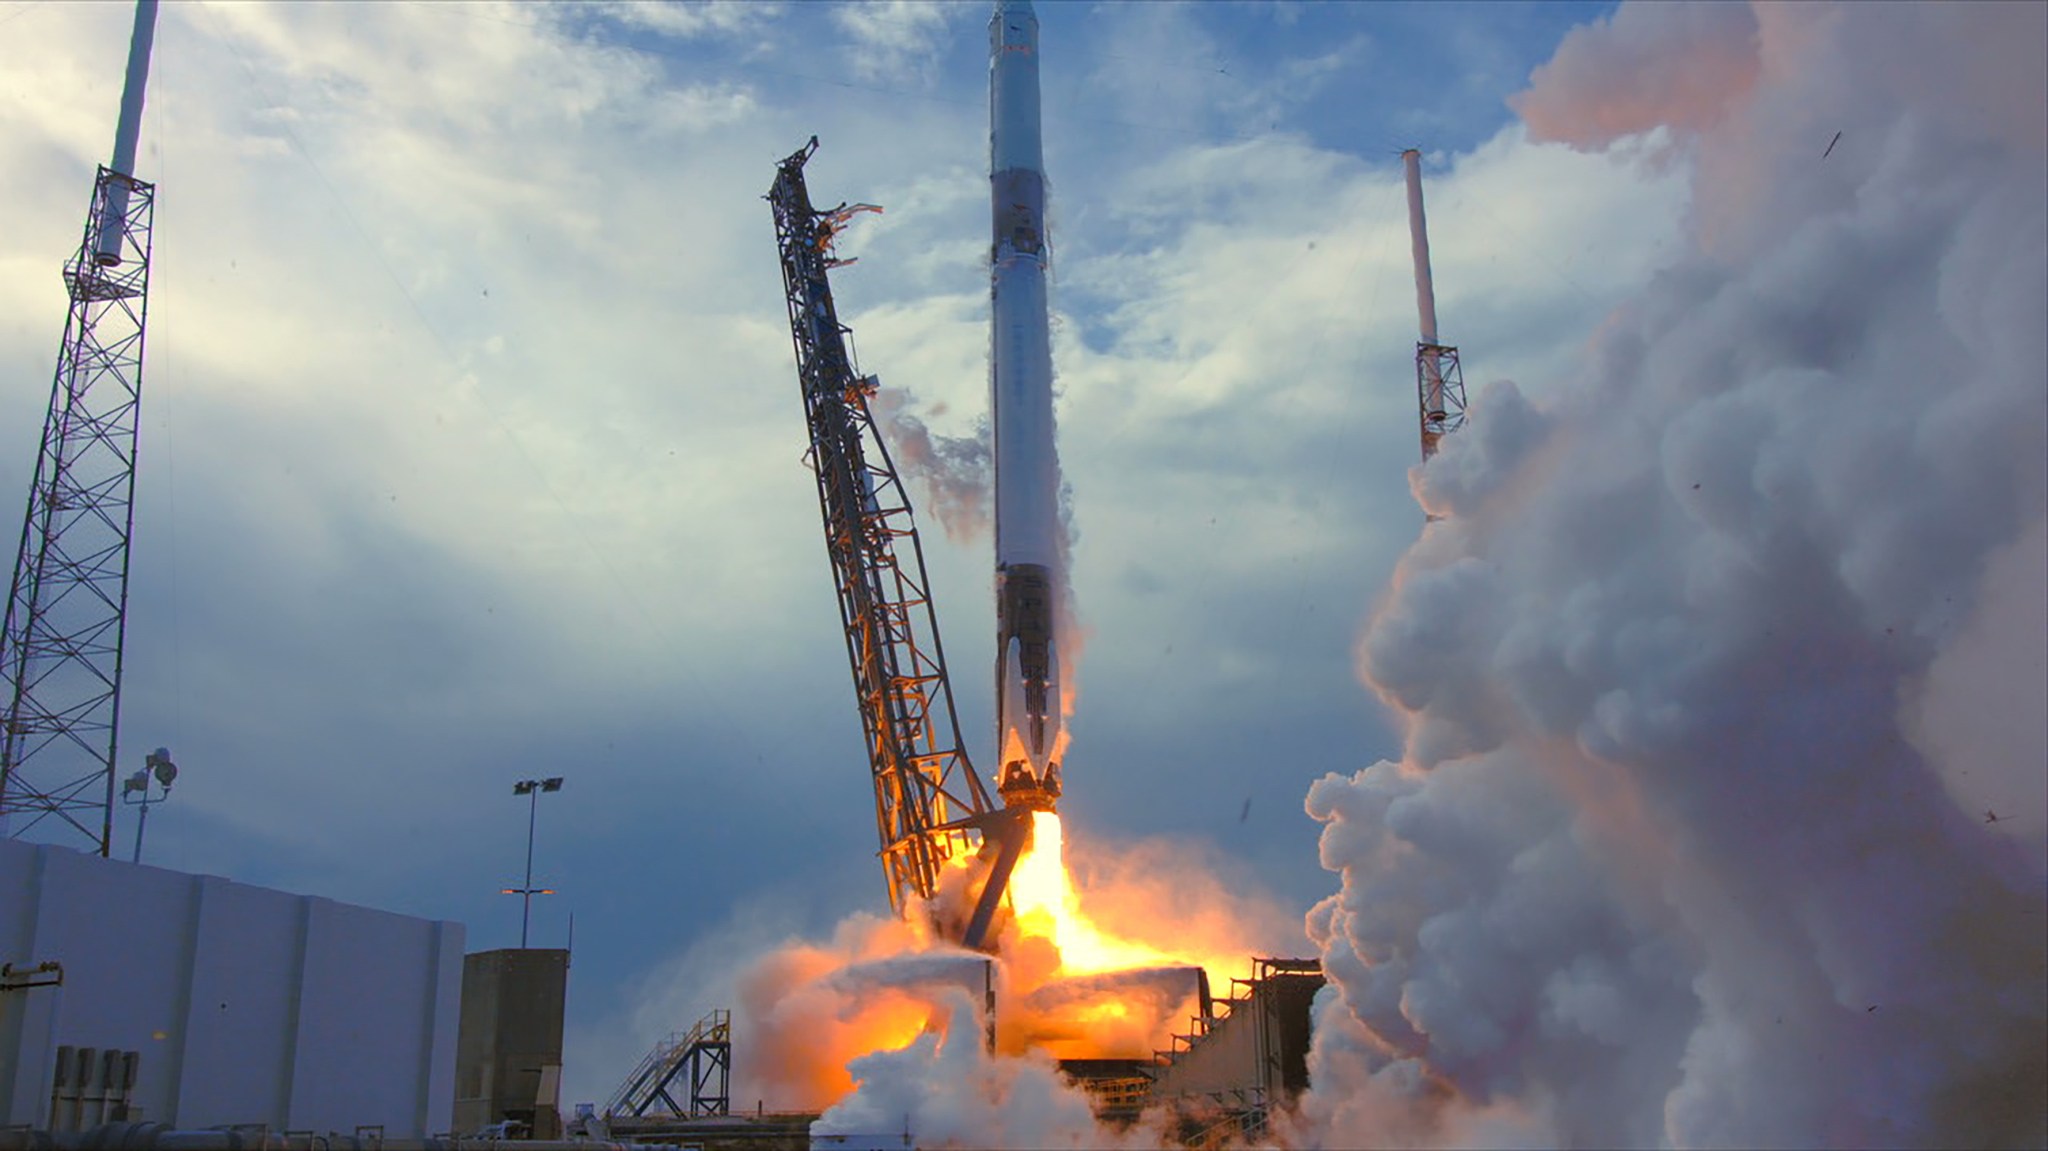 The SpaceX Falcon 9 rocket lifts off on CRS-14 from Space Launch Complex 40 at Cape Canaveral Air Force Station in Florida.